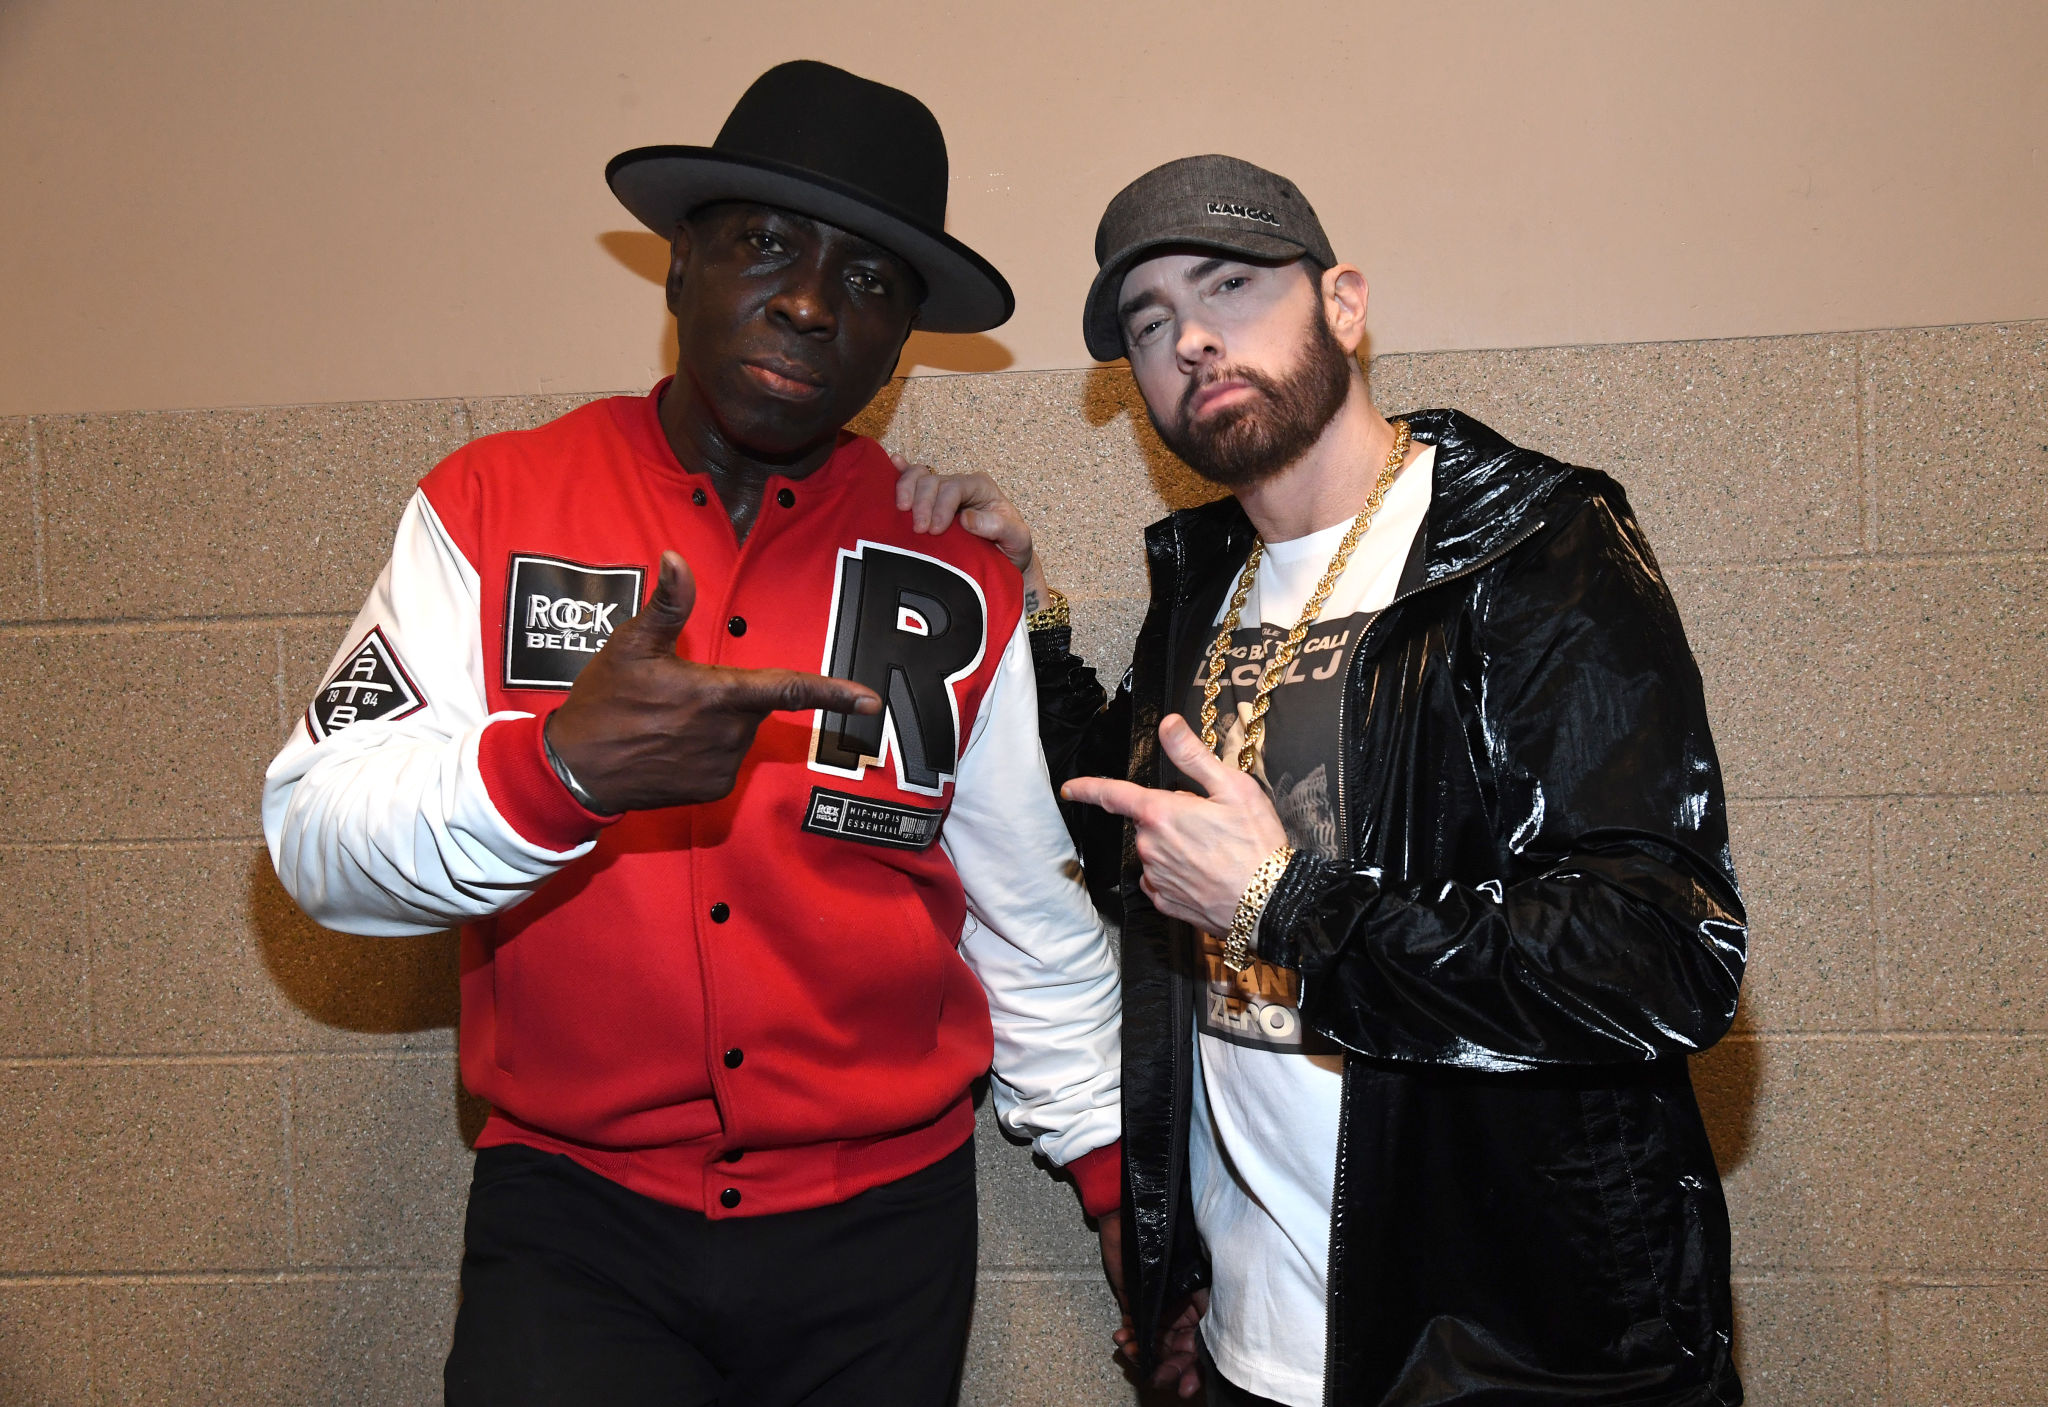 CLEVELAND, OHIO - OCTOBER 30: E-Love and Eminem pose backstage during the 36th Annual Rock & Roll Hall Of Fame Induction Ceremony at Rocket Mortgage Fieldhouse on October 30, 2021 in Cleveland, Ohio. (Photo by Kevin Mazur/Getty Images for The Rock and Roll Hall of Fame )